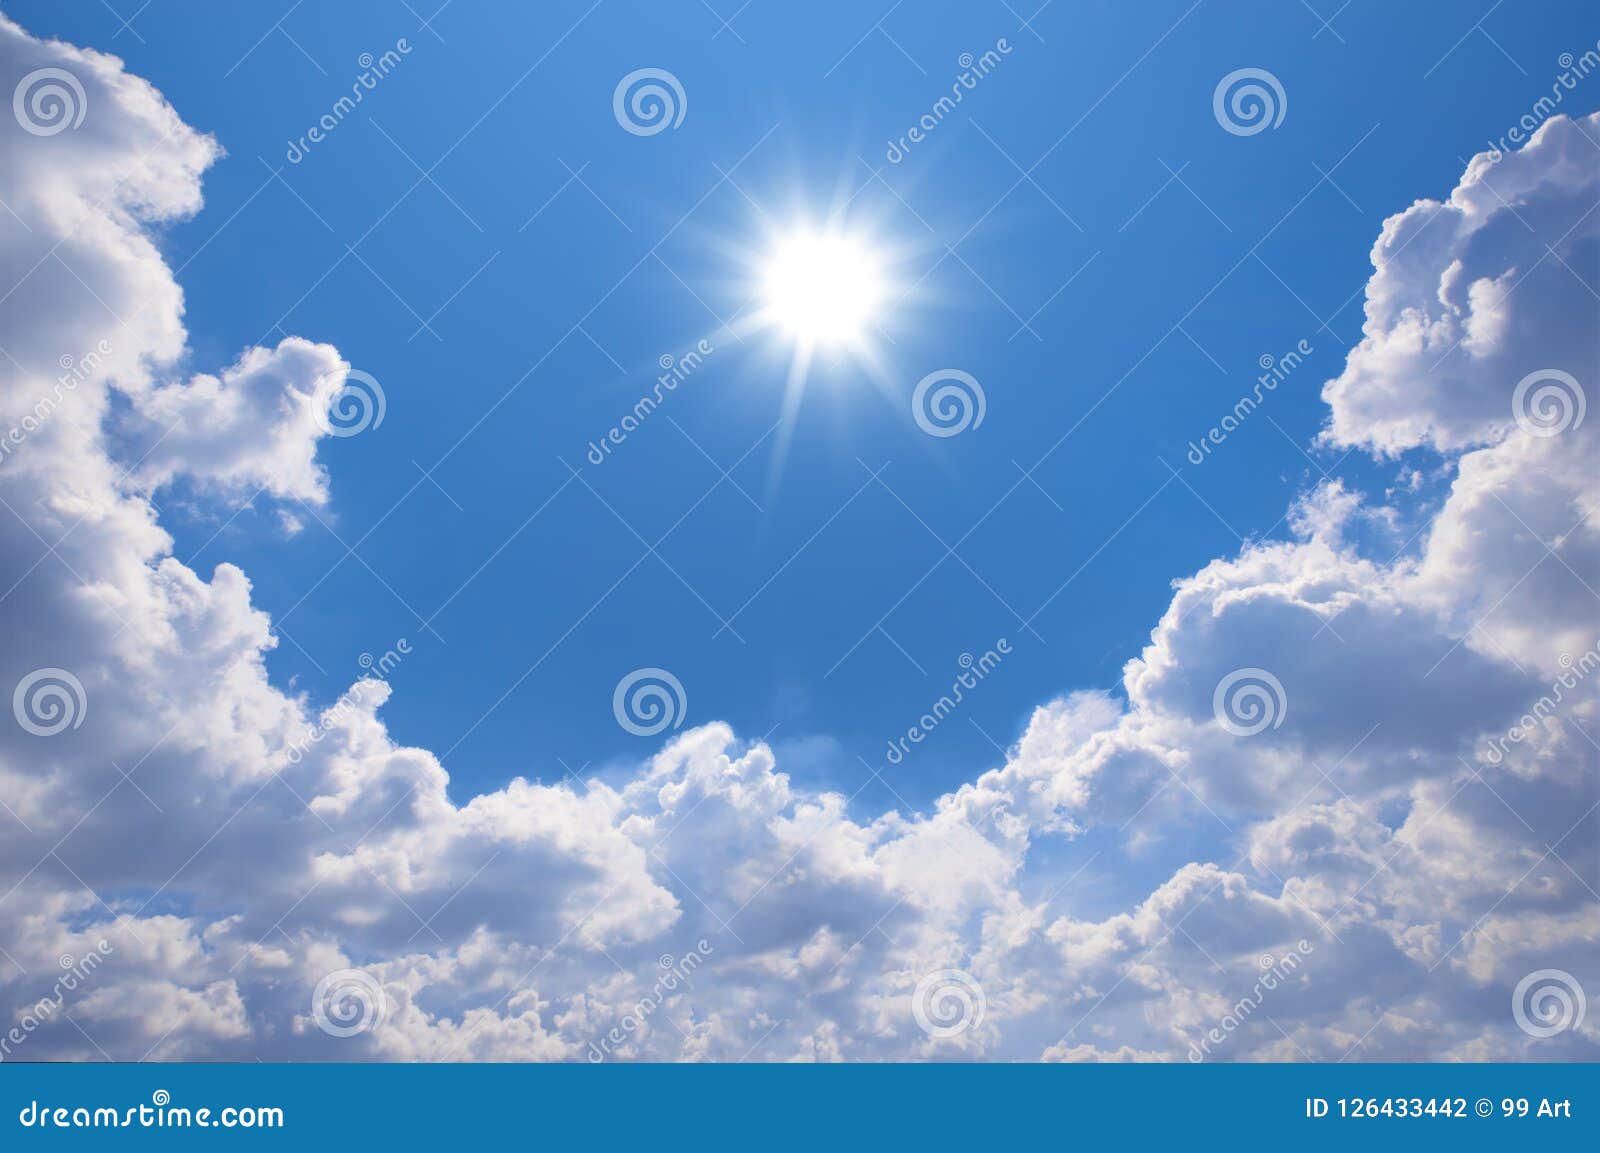 blue sky with clouds and sun reflection.the sun shines bright in